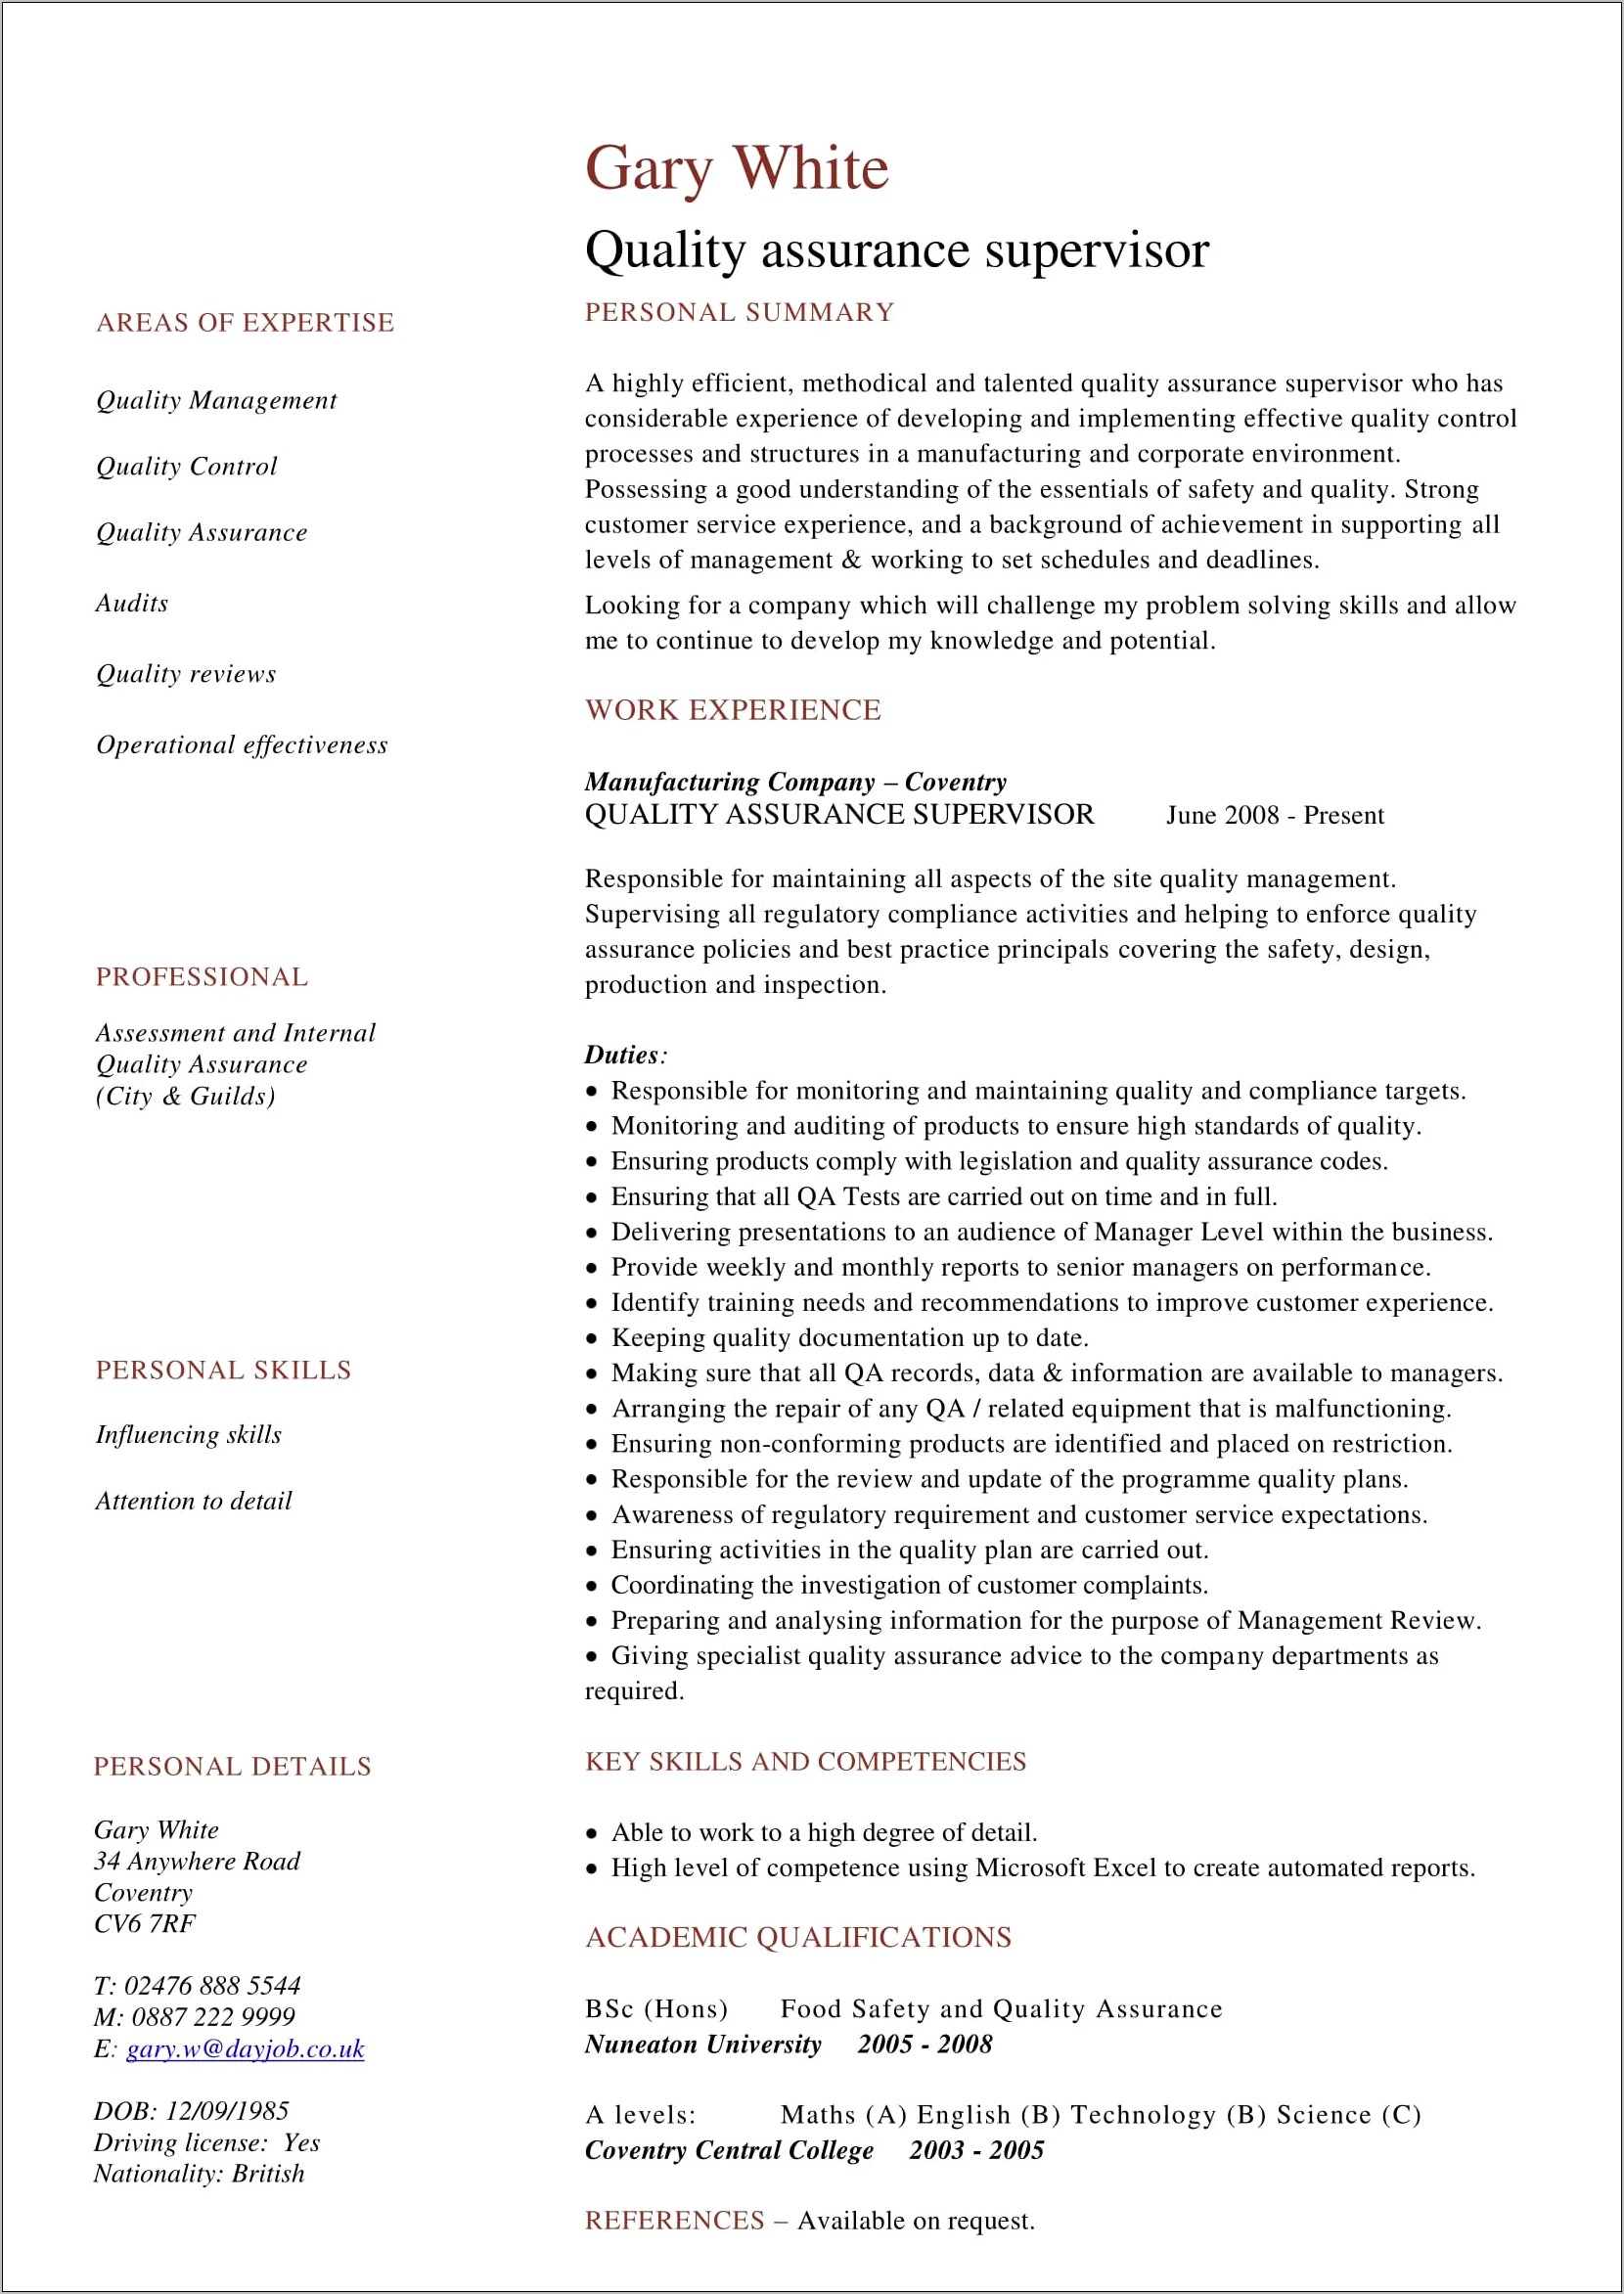 Resume Summary Examples For Quality Assurance